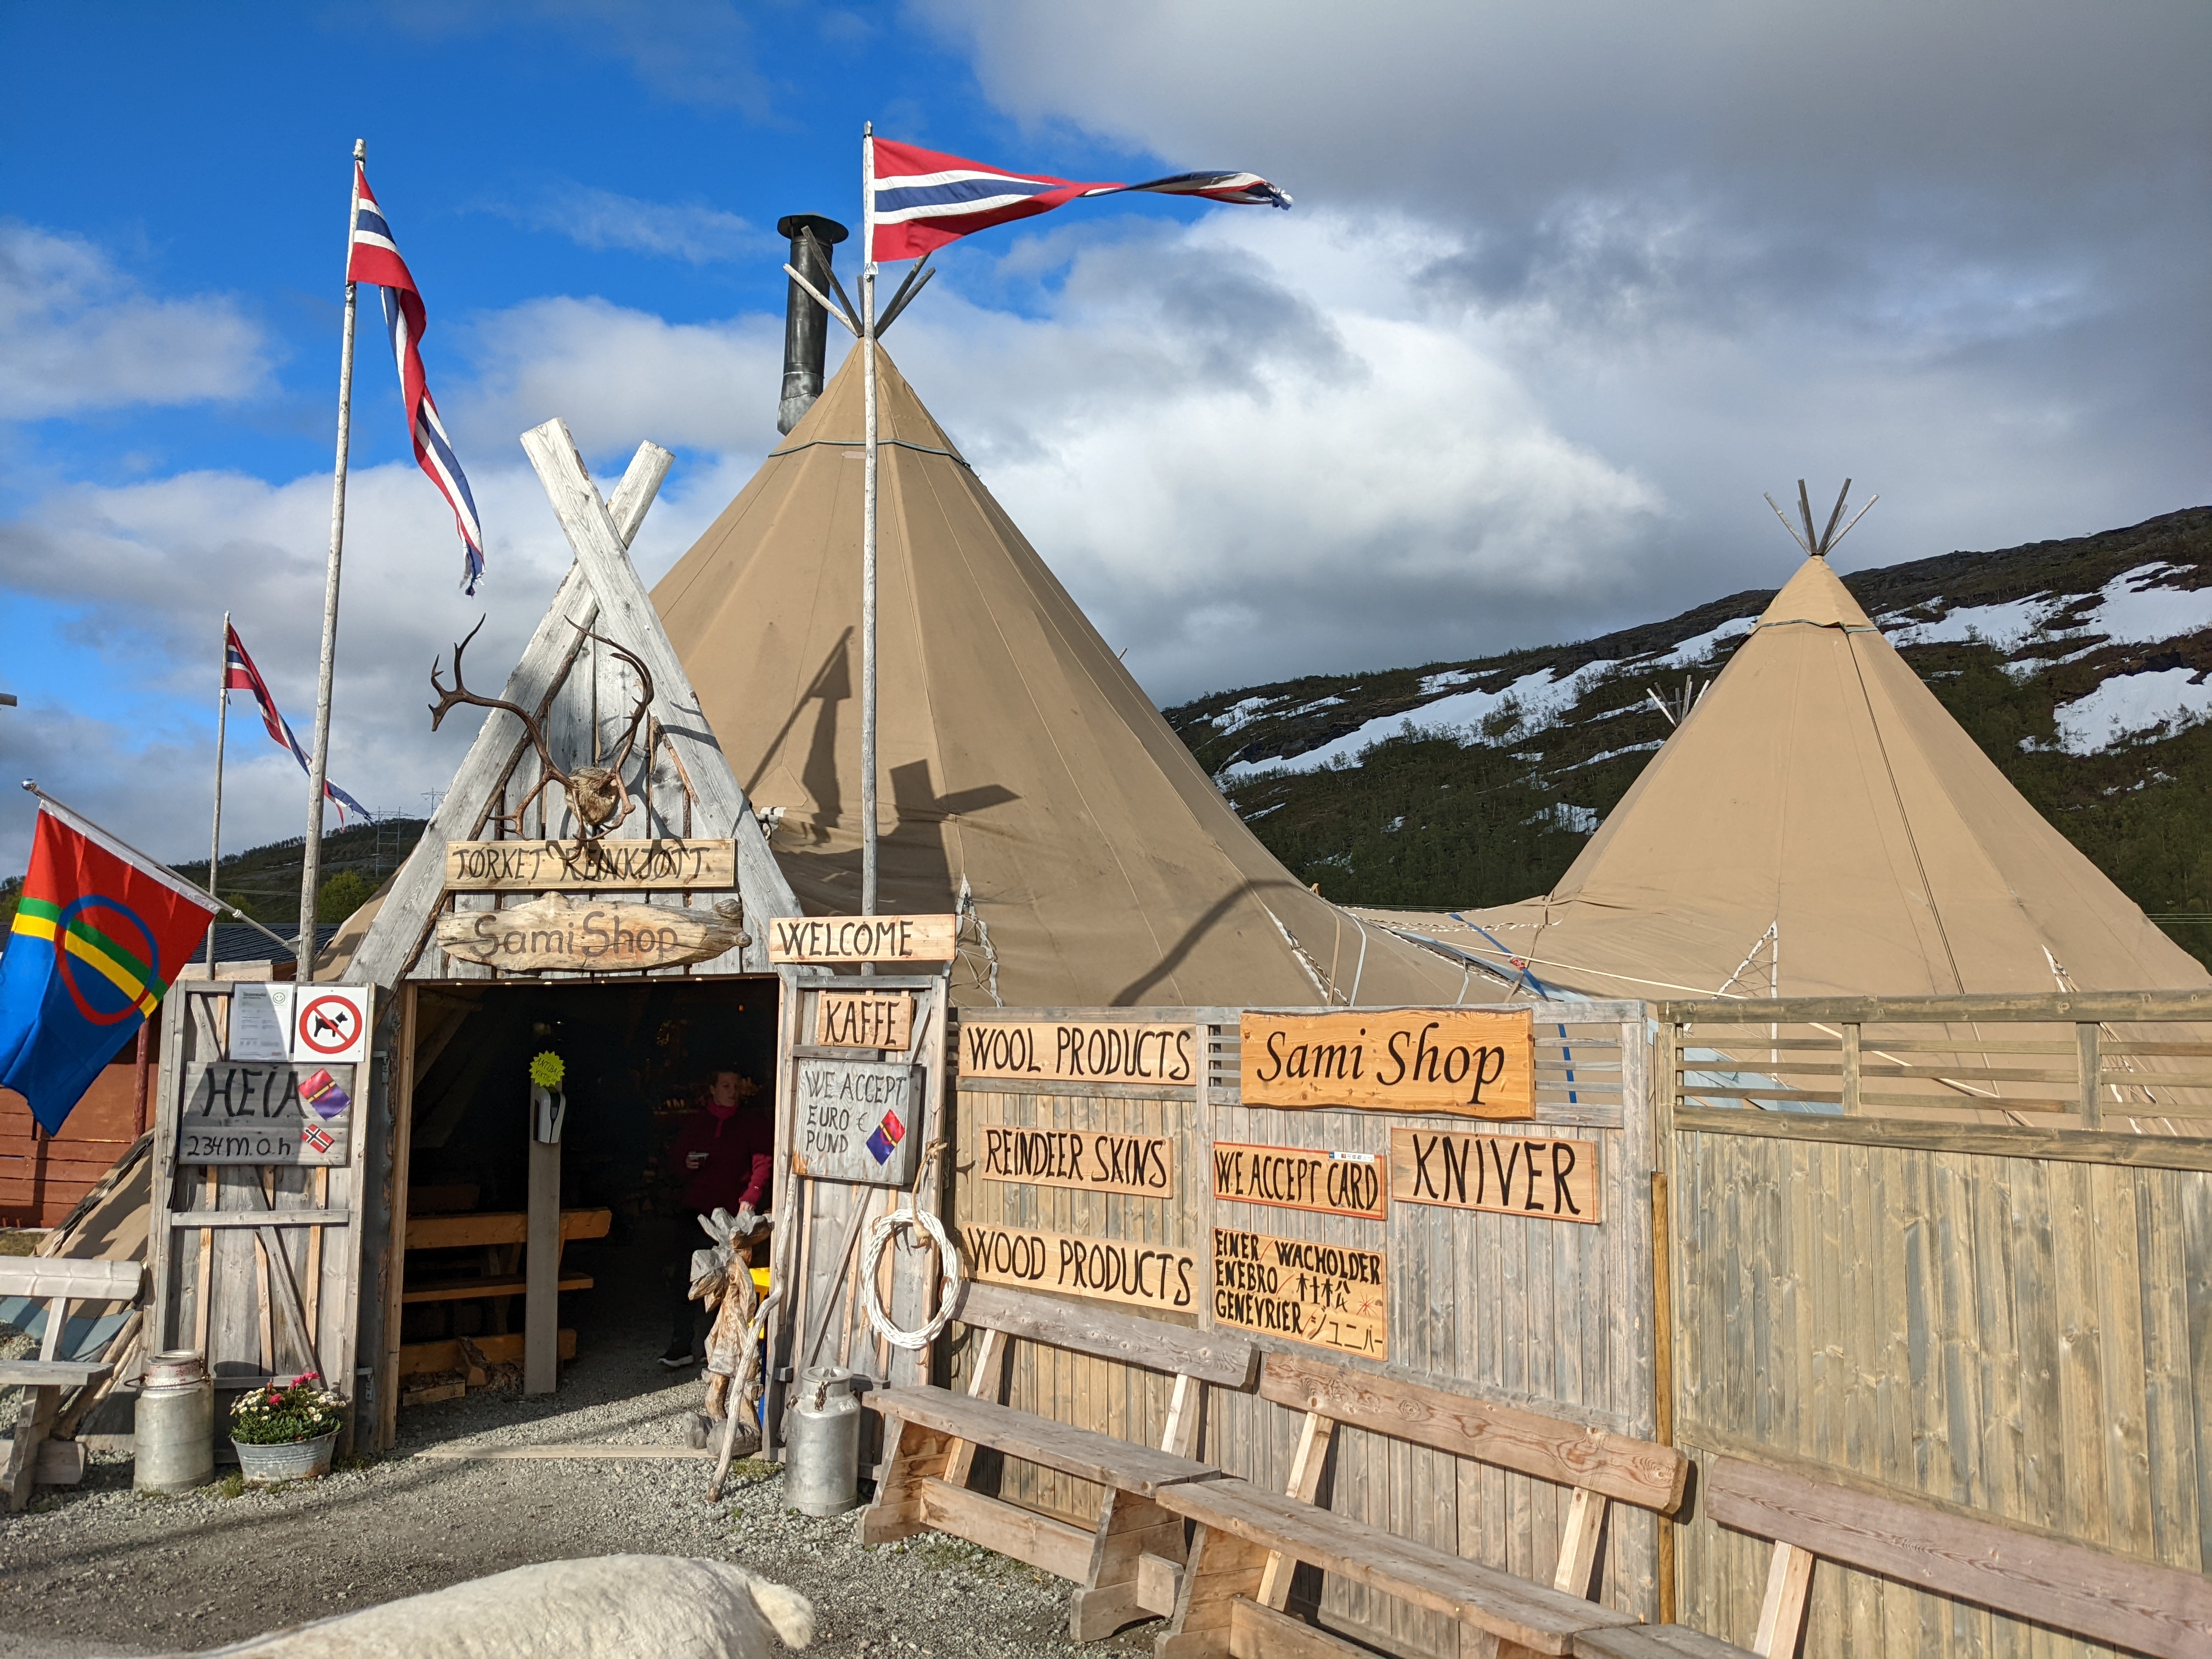 a view of the entrance to the sami shop tents with sami and norwegian flags flying and reindeer antlers above the door